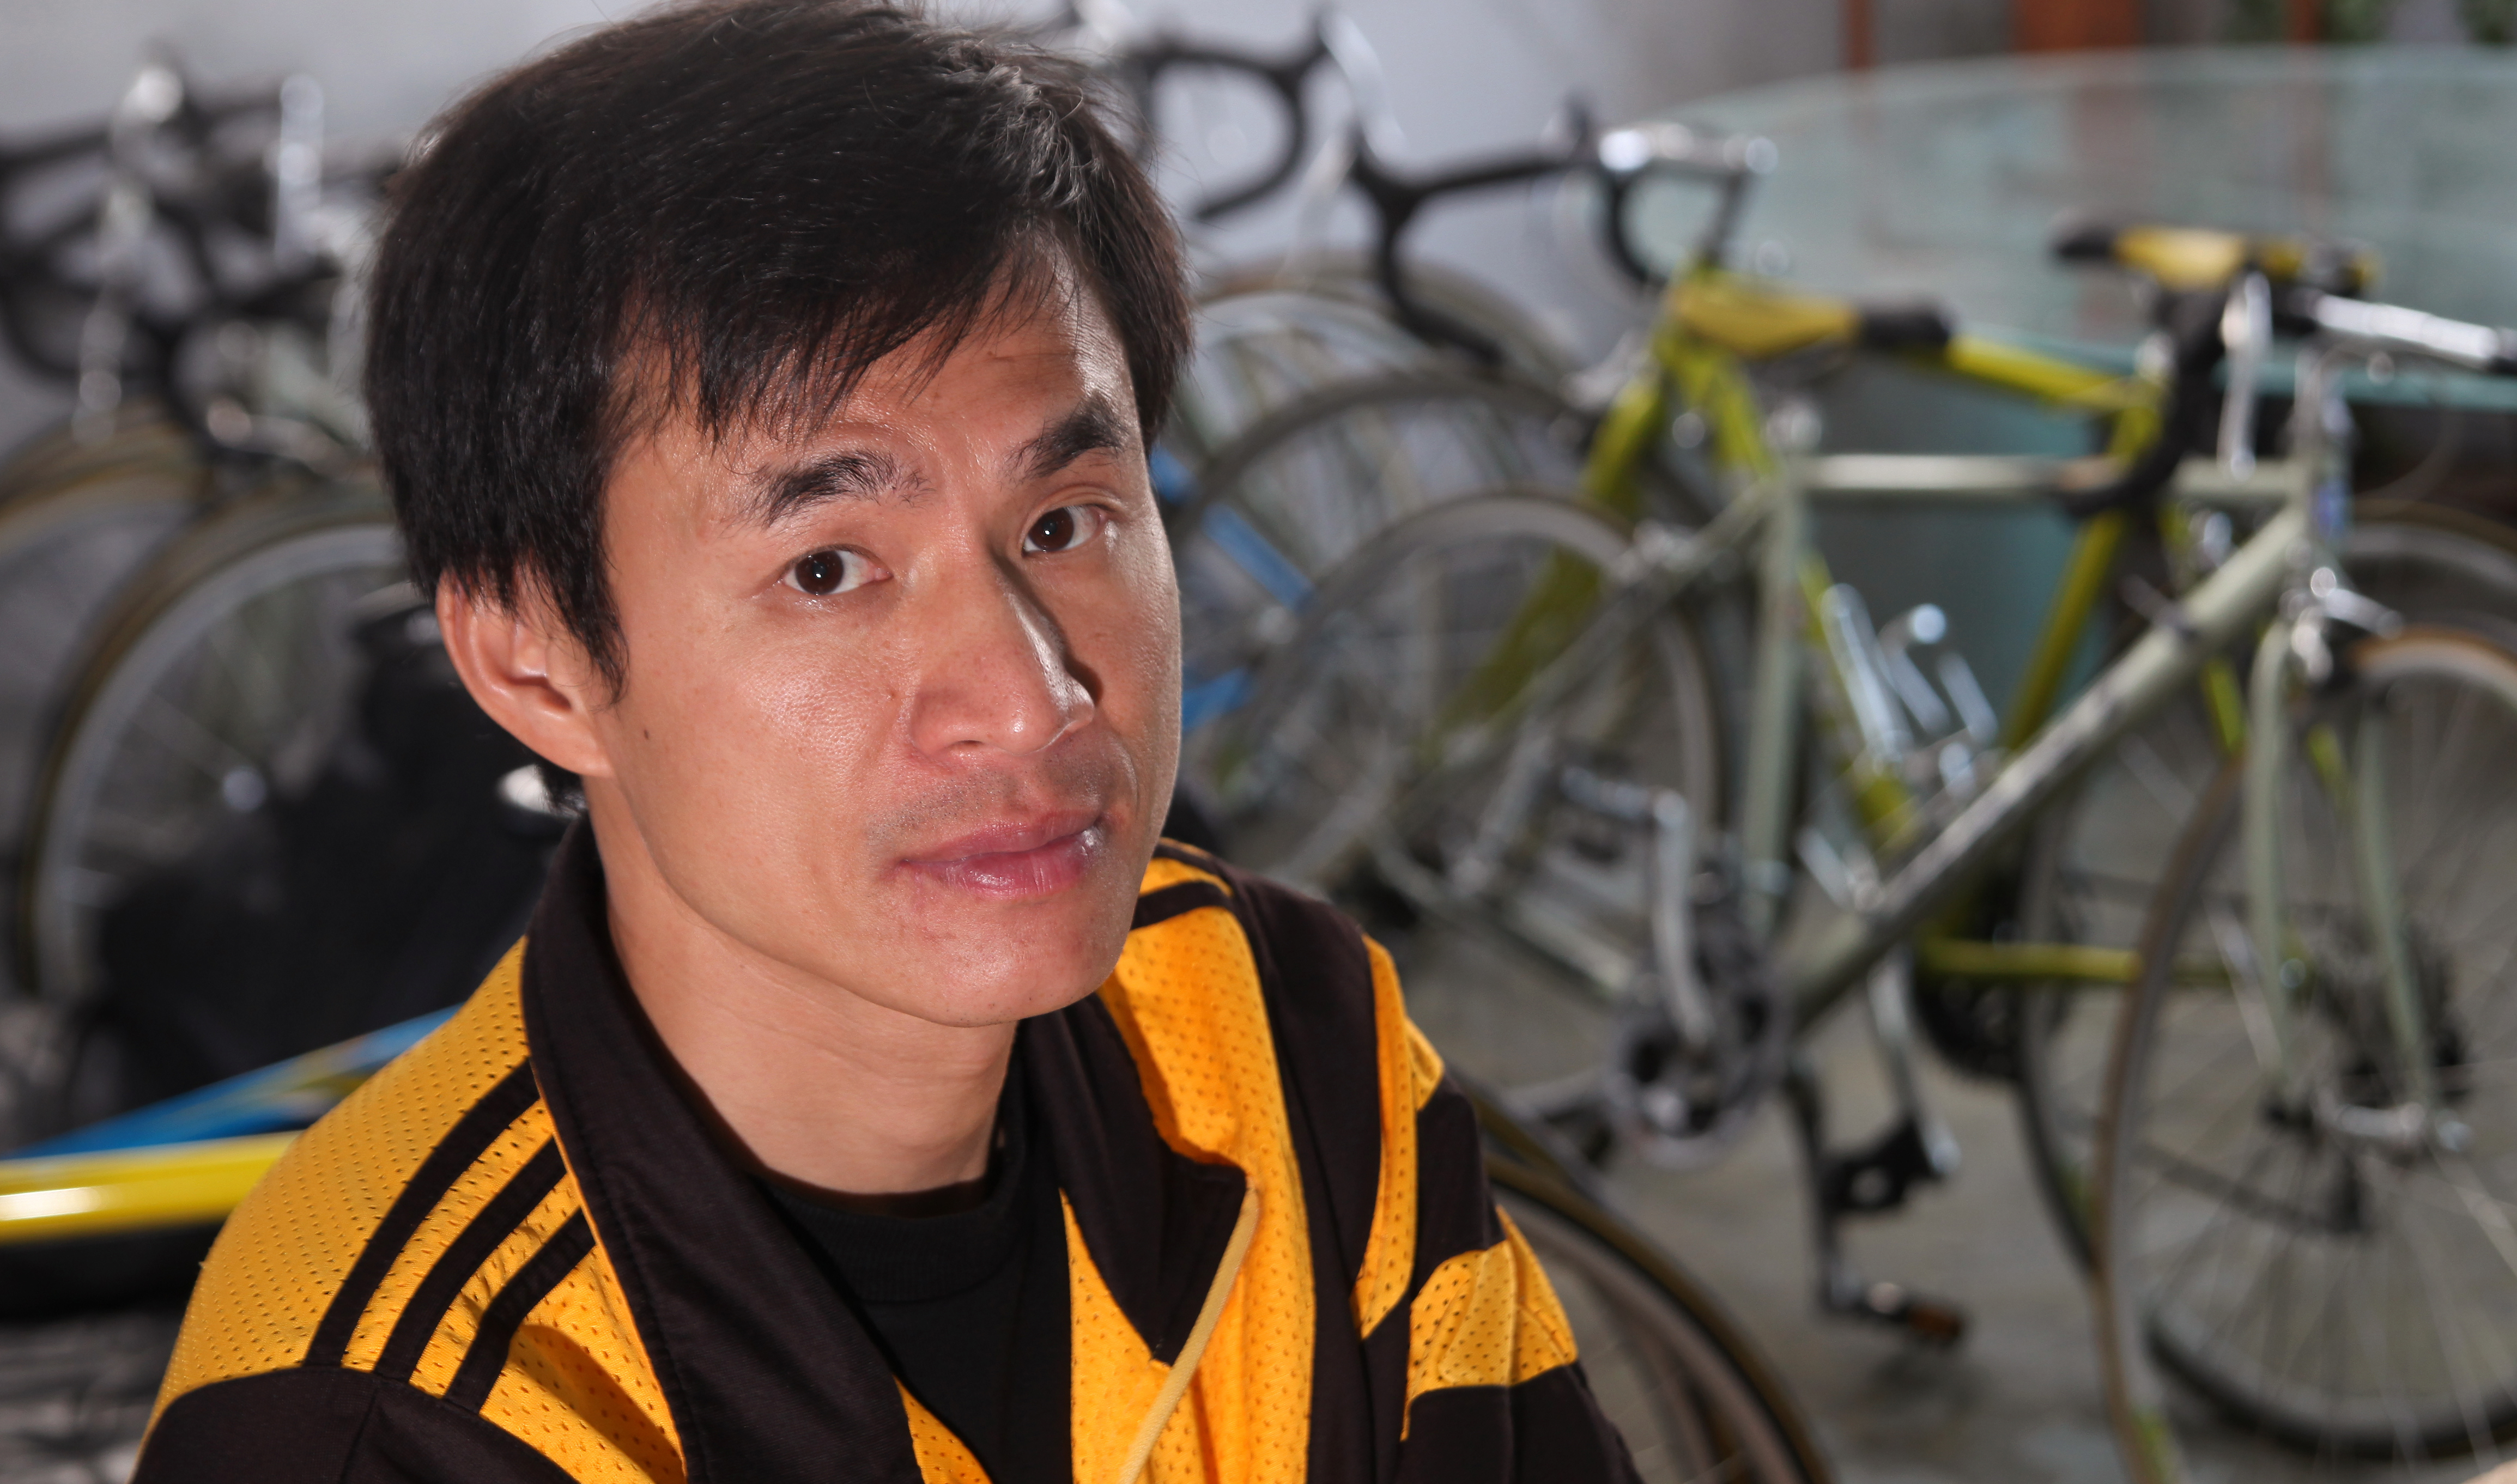 Hung Chung-yam, Hong Kong's top cyclist in the 1980s, is improving as a runner. Photo: Edmond So